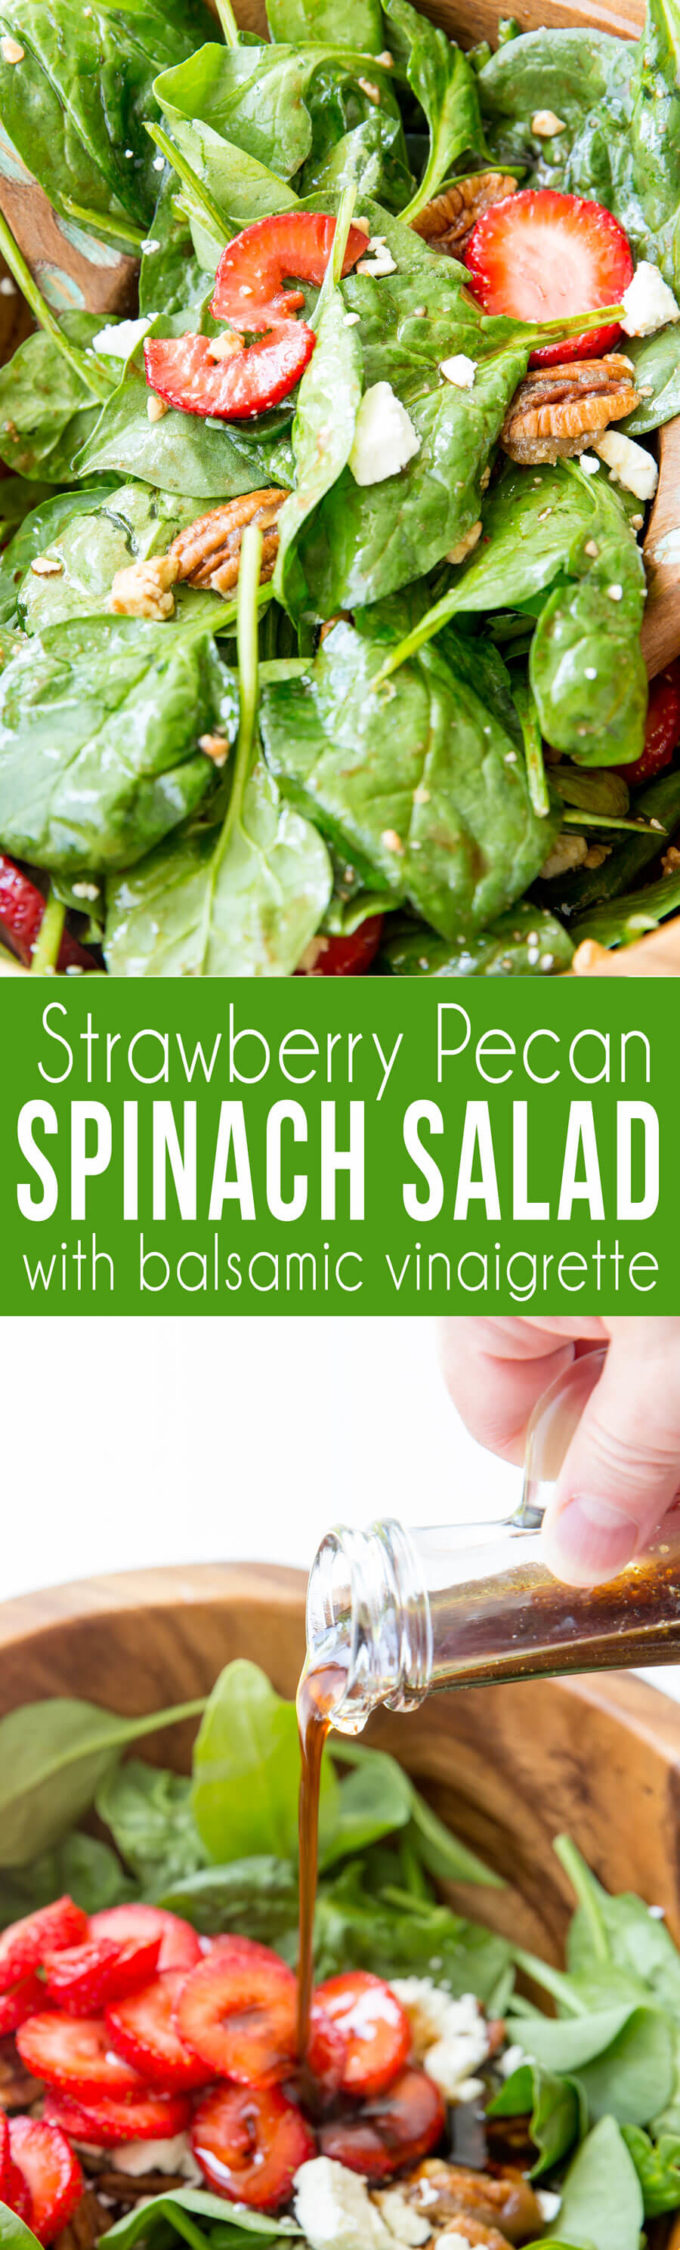 Strawberry Pecan Spinach Salad with a balsamic vinaigrette